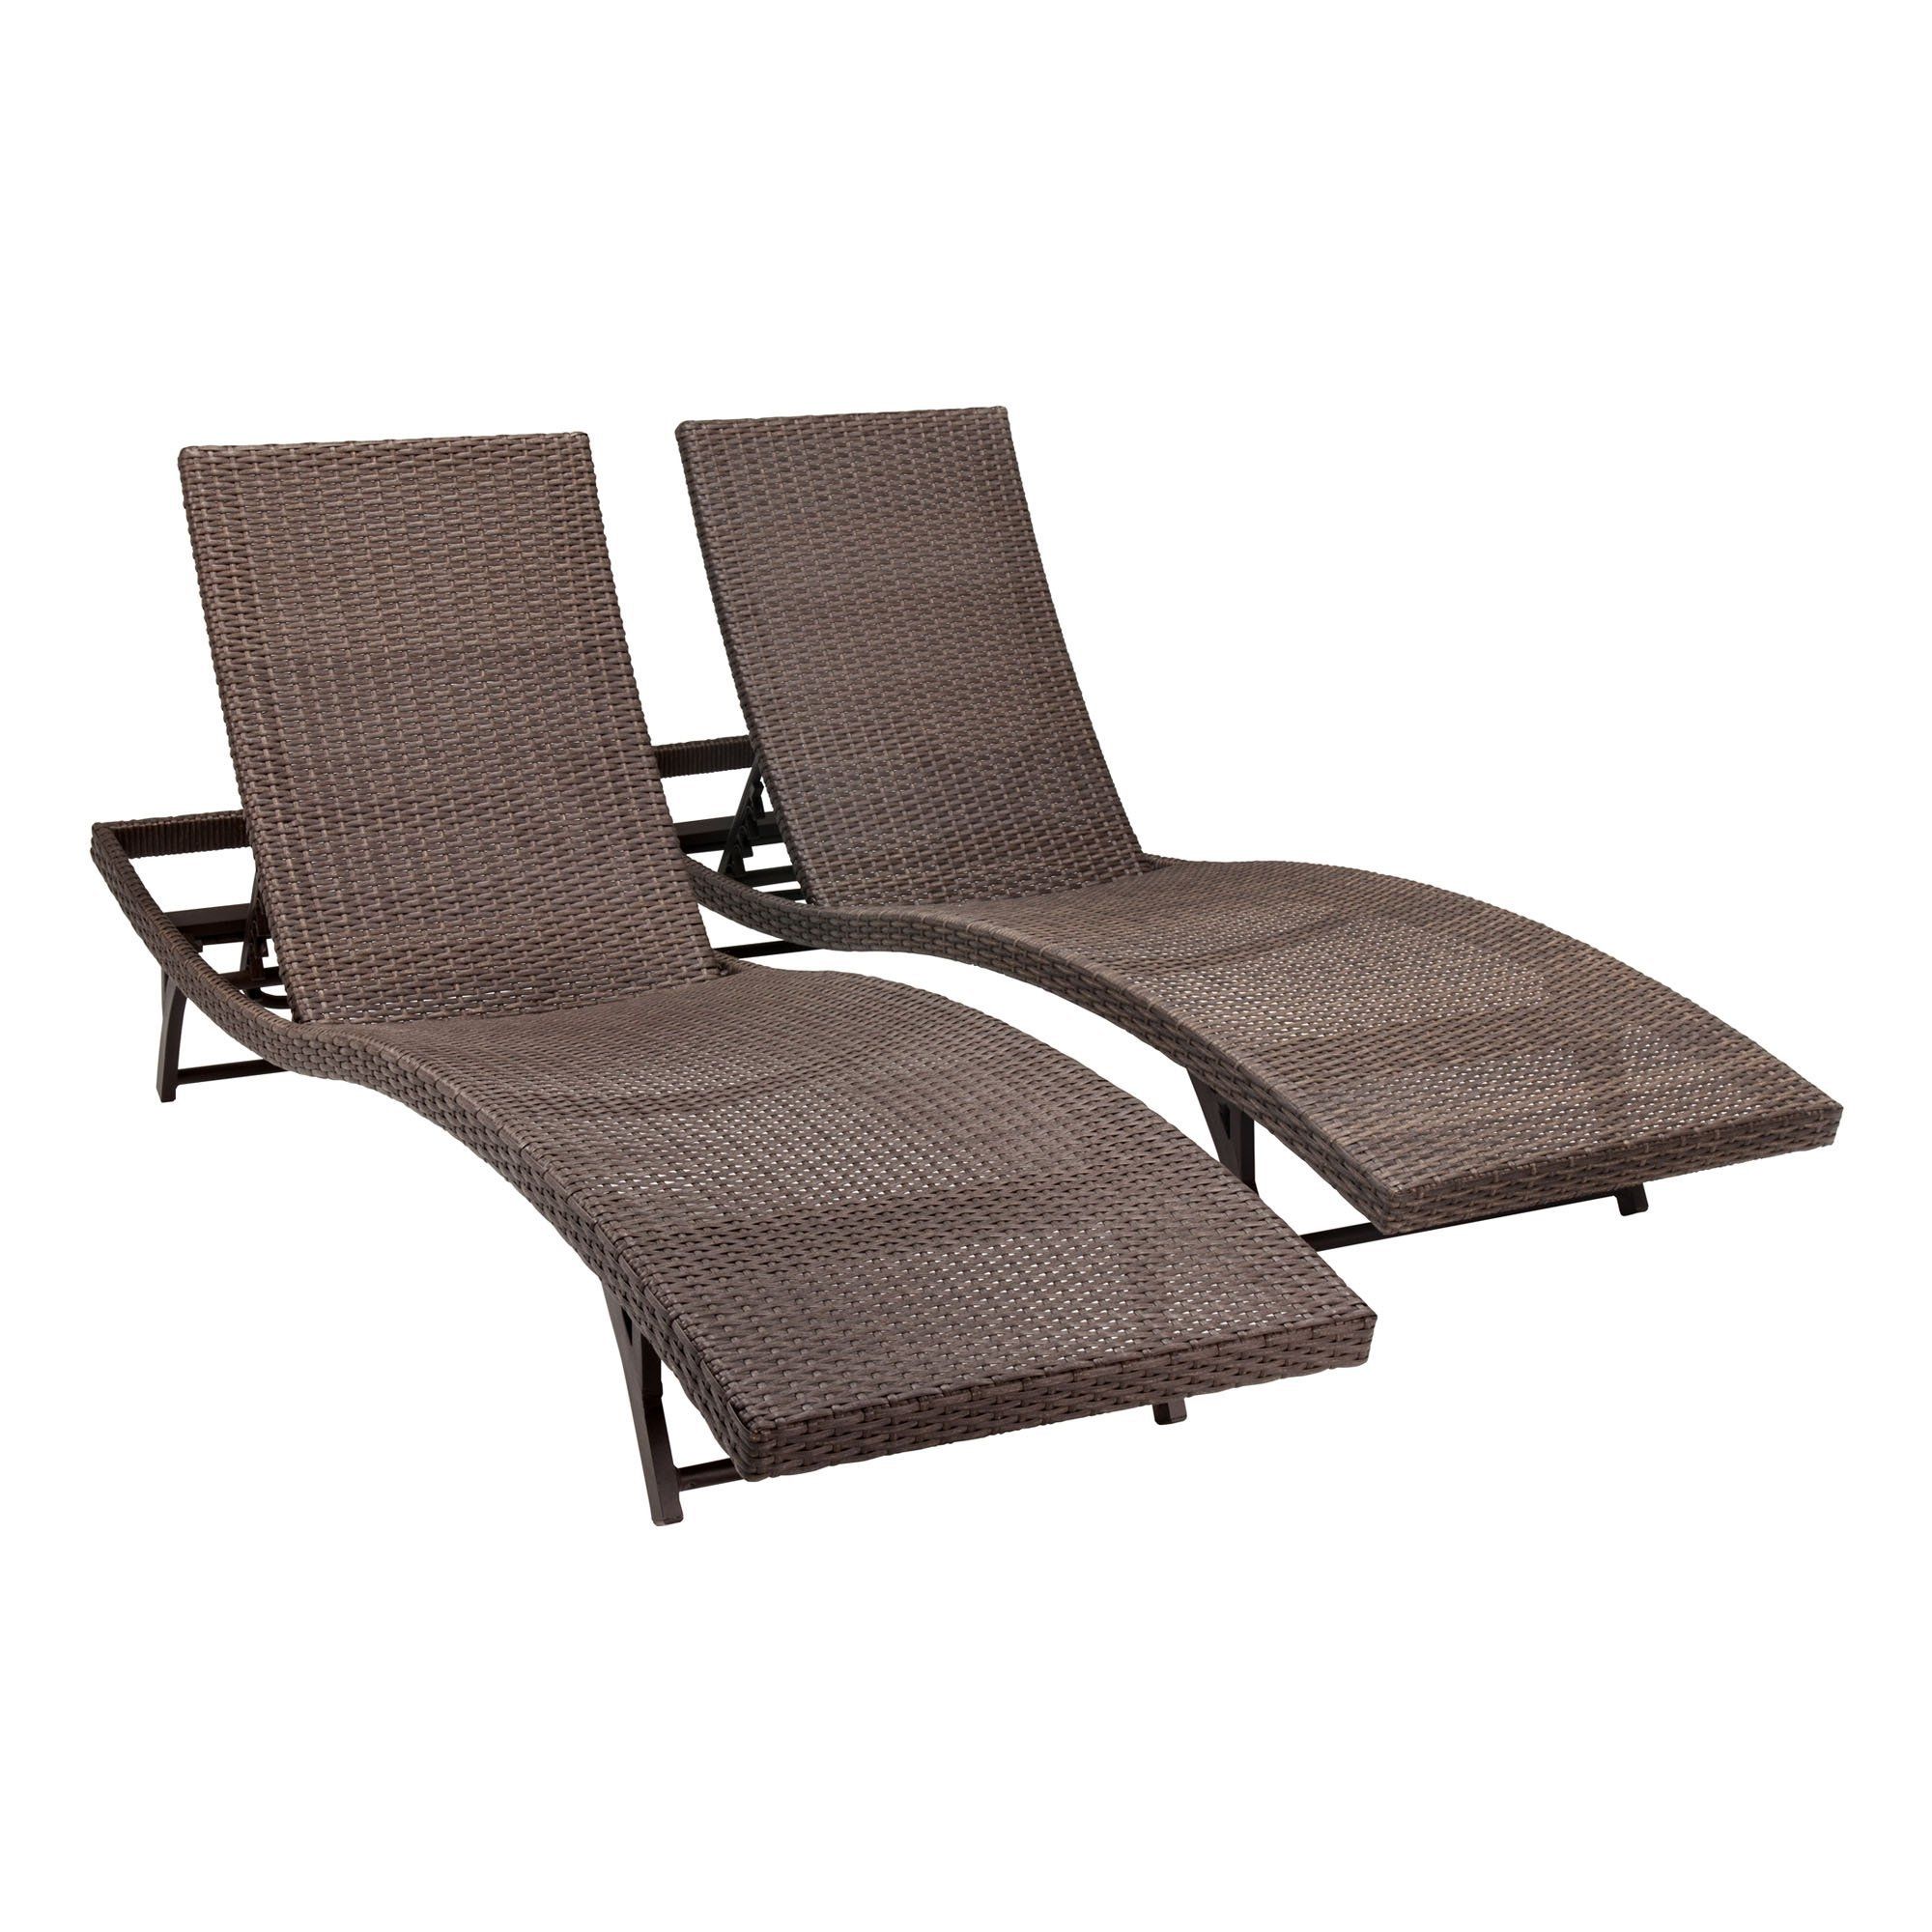 Pool Chaise Lounge Chairs Intended For Preferred Outdoor Chaise Lounge Chairs Ideas : Best Outdoor Chaise Lounge (View 9 of 15)